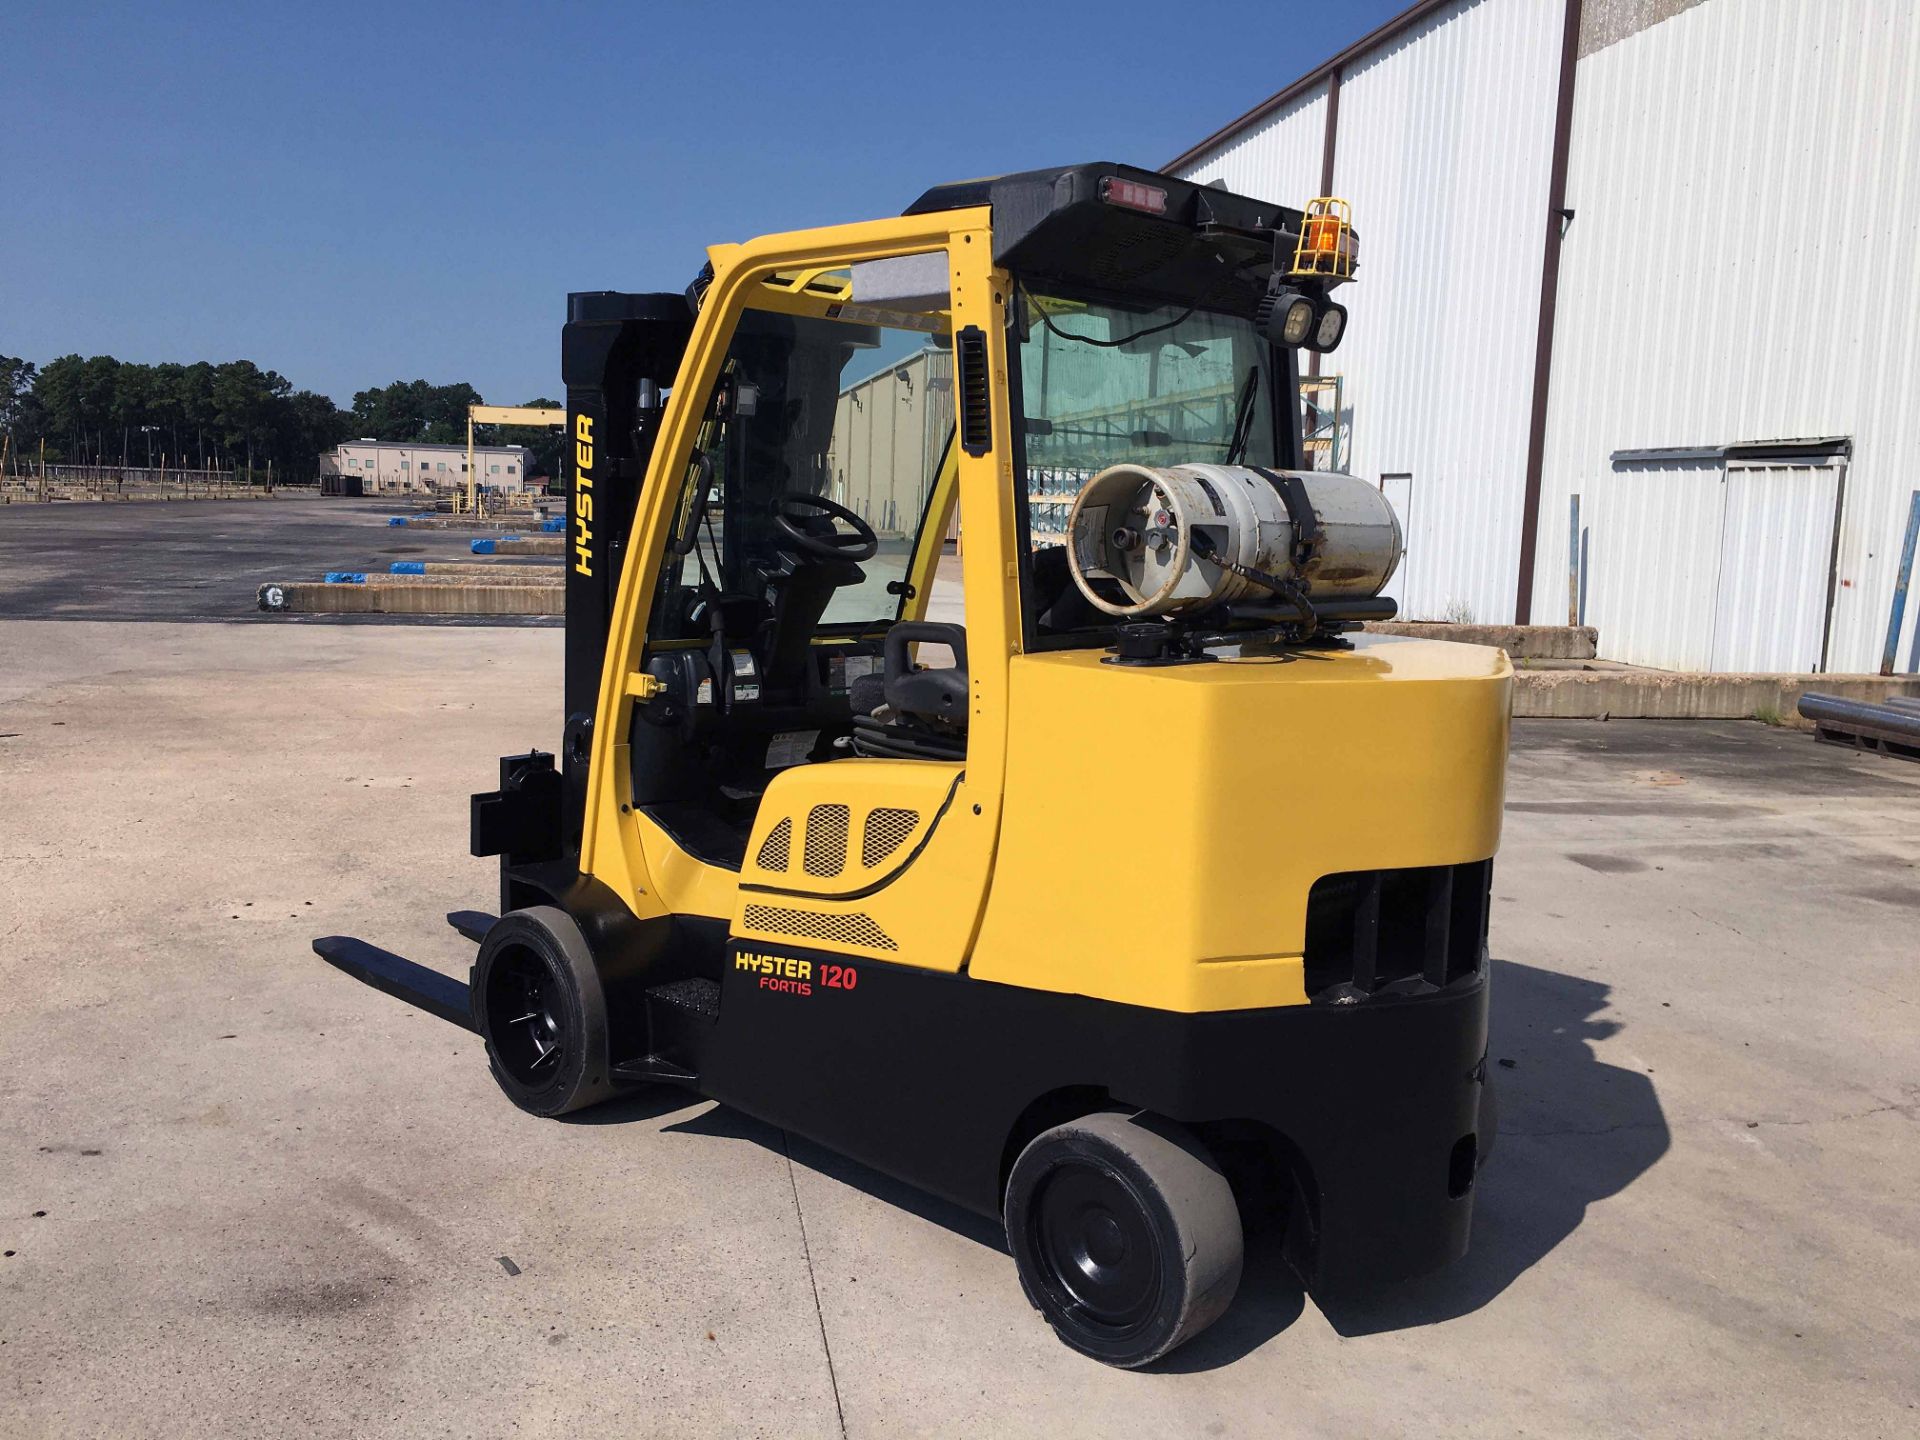 FORKLIFT, HYSTER 12,000 LB BASE CAP. MDL. S120FT, new 2015, LPG, 171” max. lift ht., 83” 3-stage - Image 3 of 7